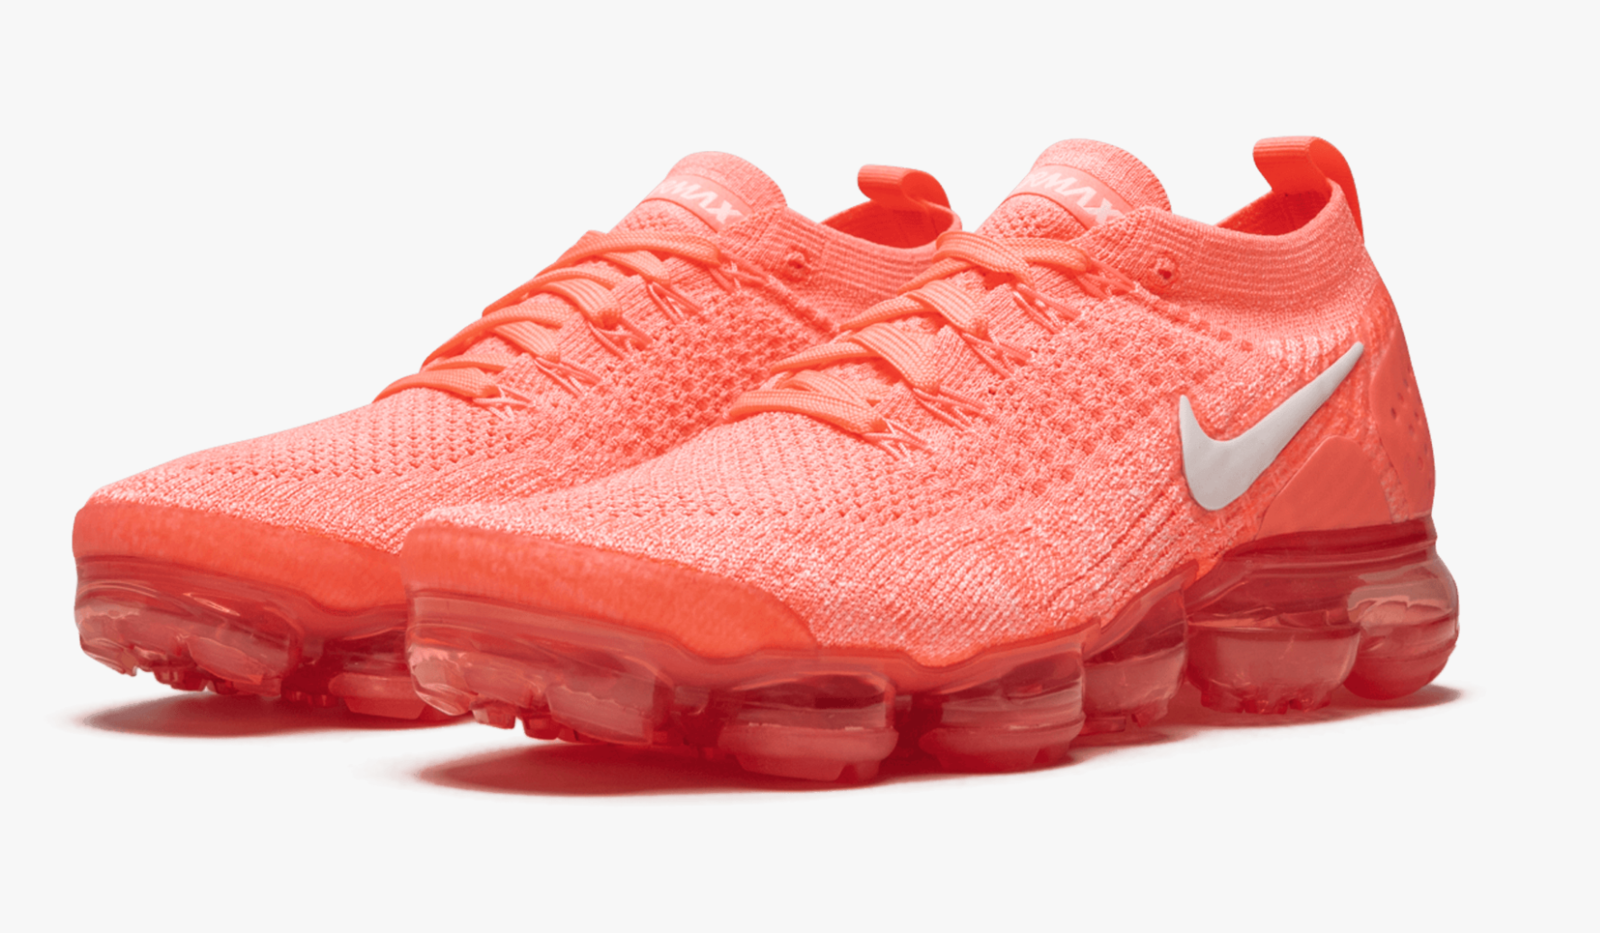 Primary image for Nike Air VaporMax 2 Crimson Pulse (W)